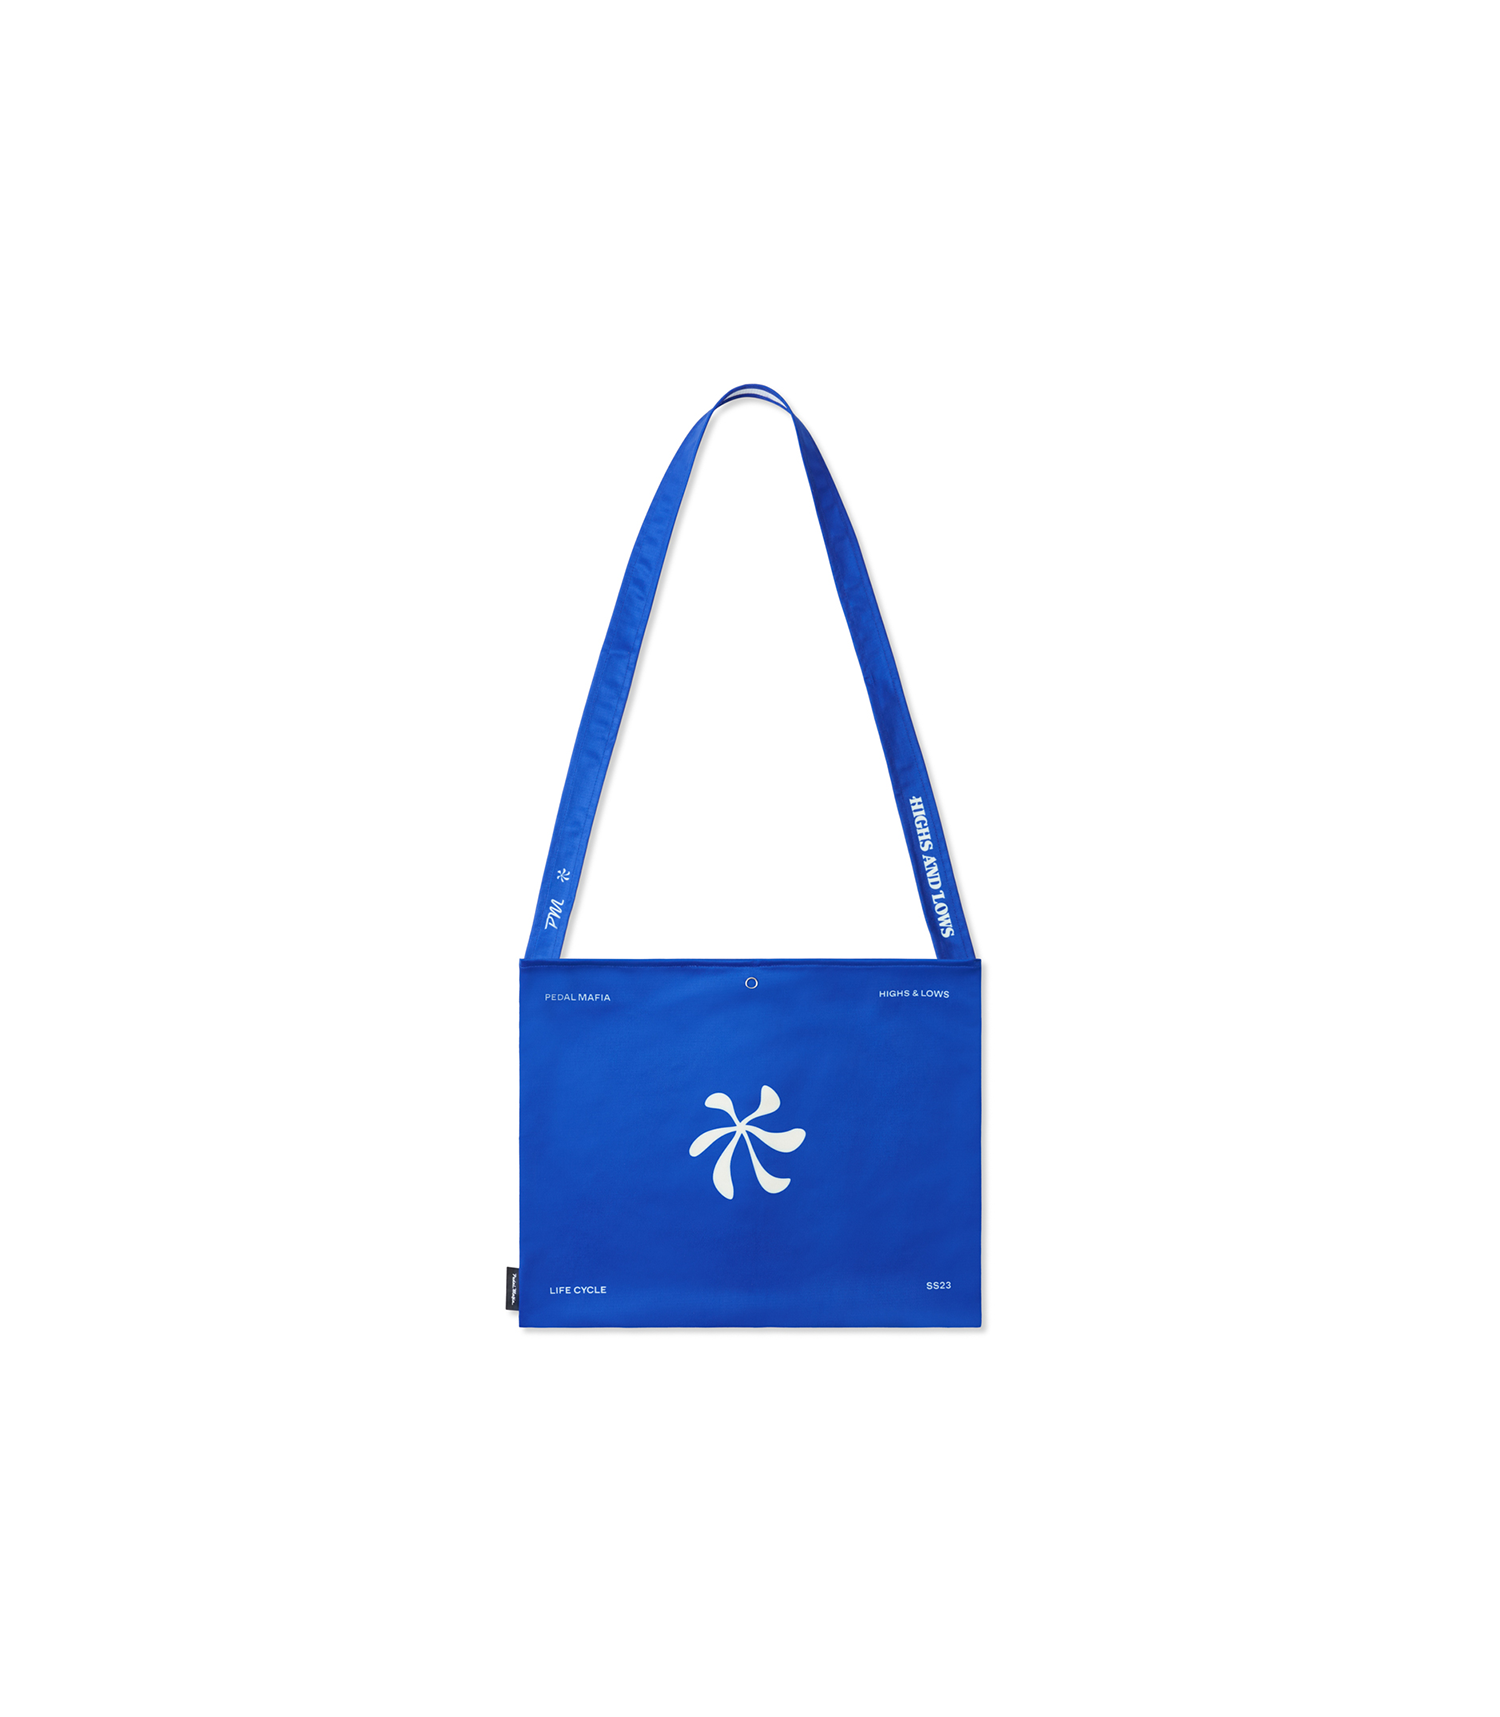 Life Cycle Musette - Blue